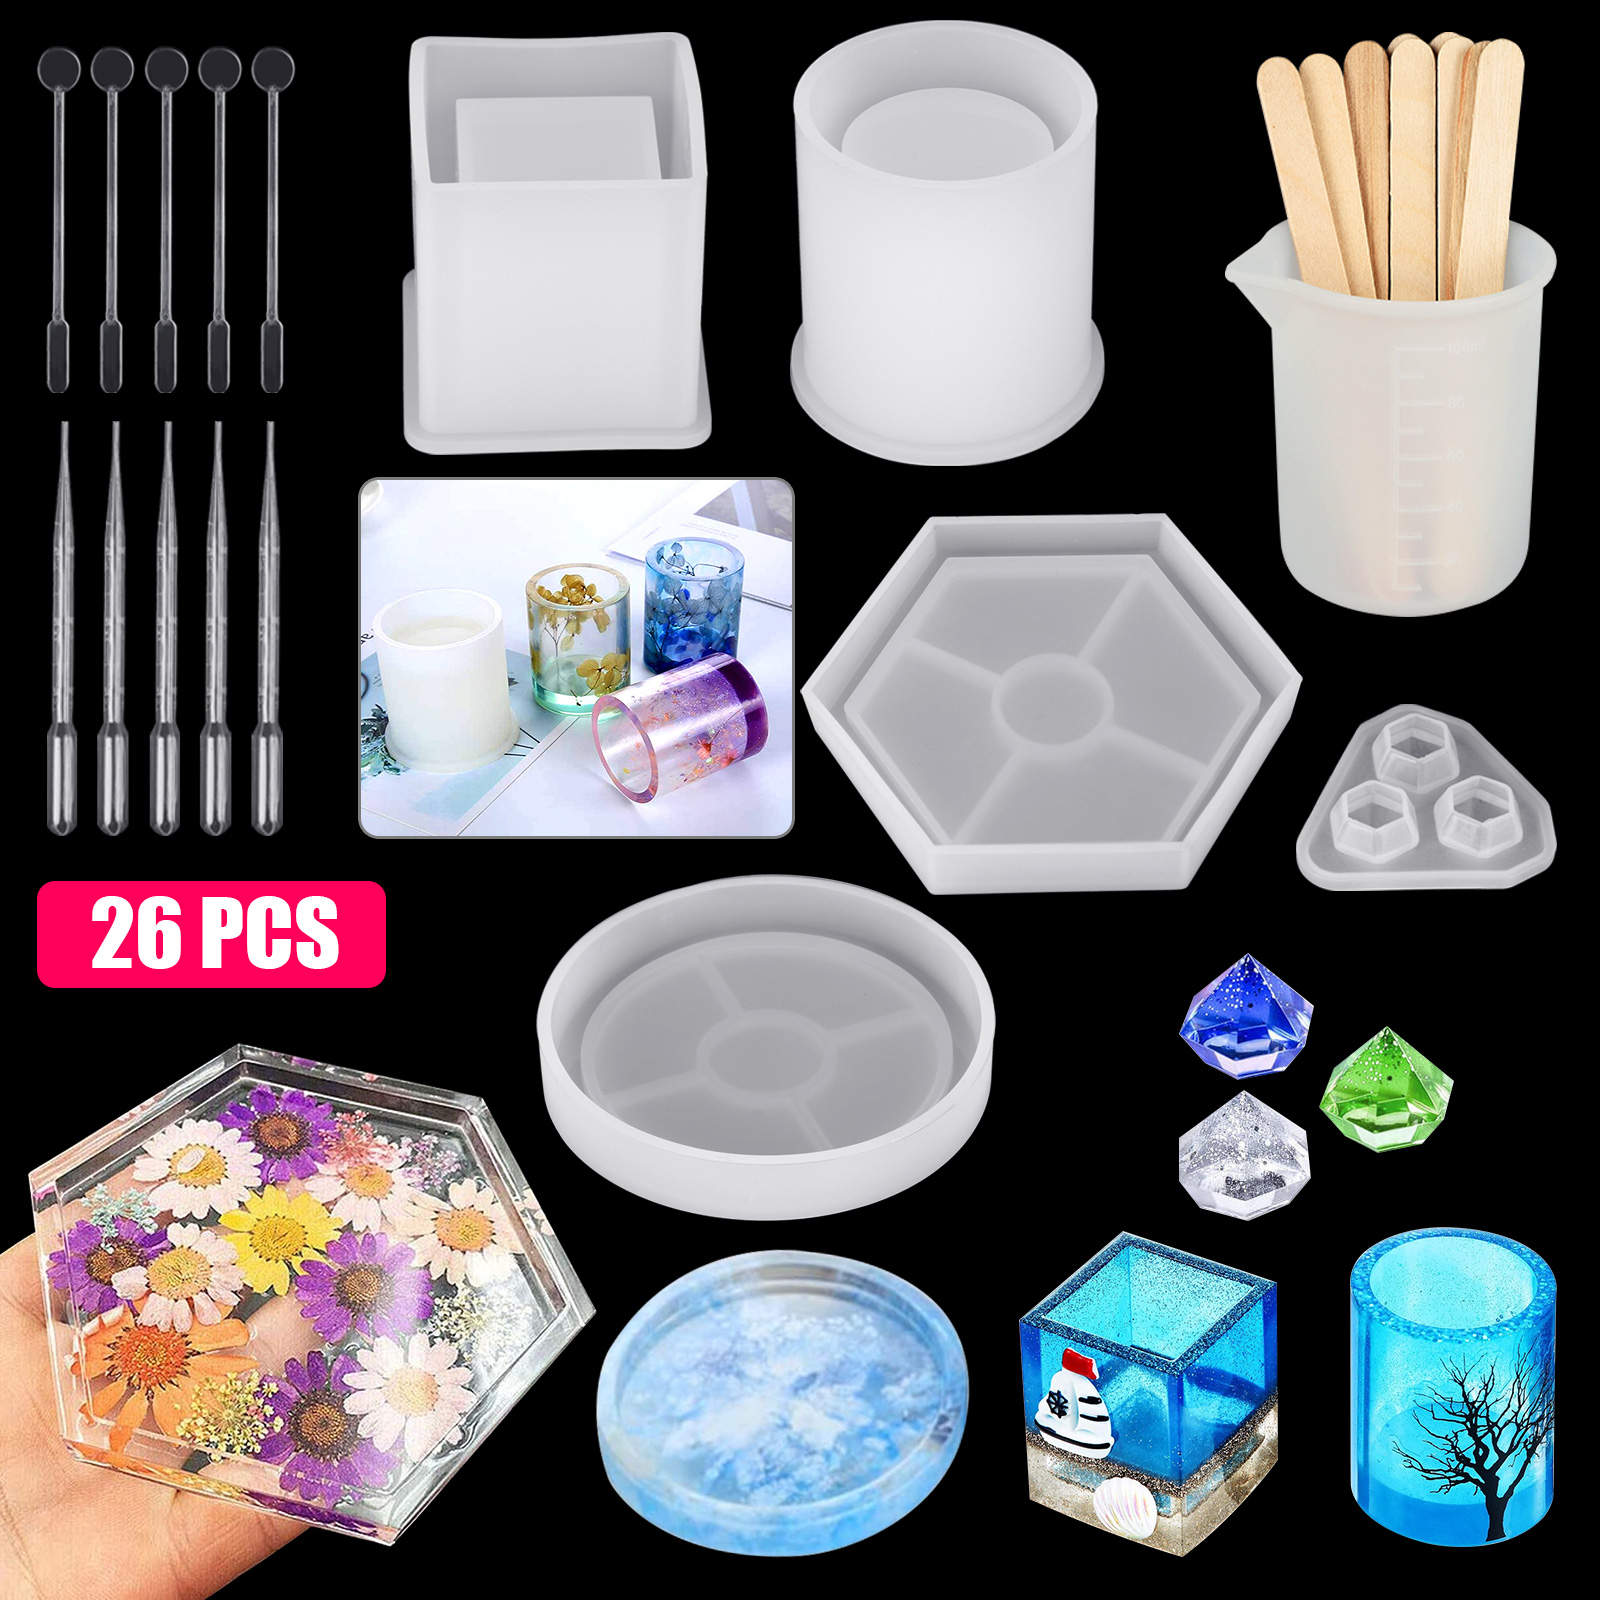 Silicone Resin Mold For DIY Jewelry Pendant Making Craf Handmade Tool Mould M3Y6 